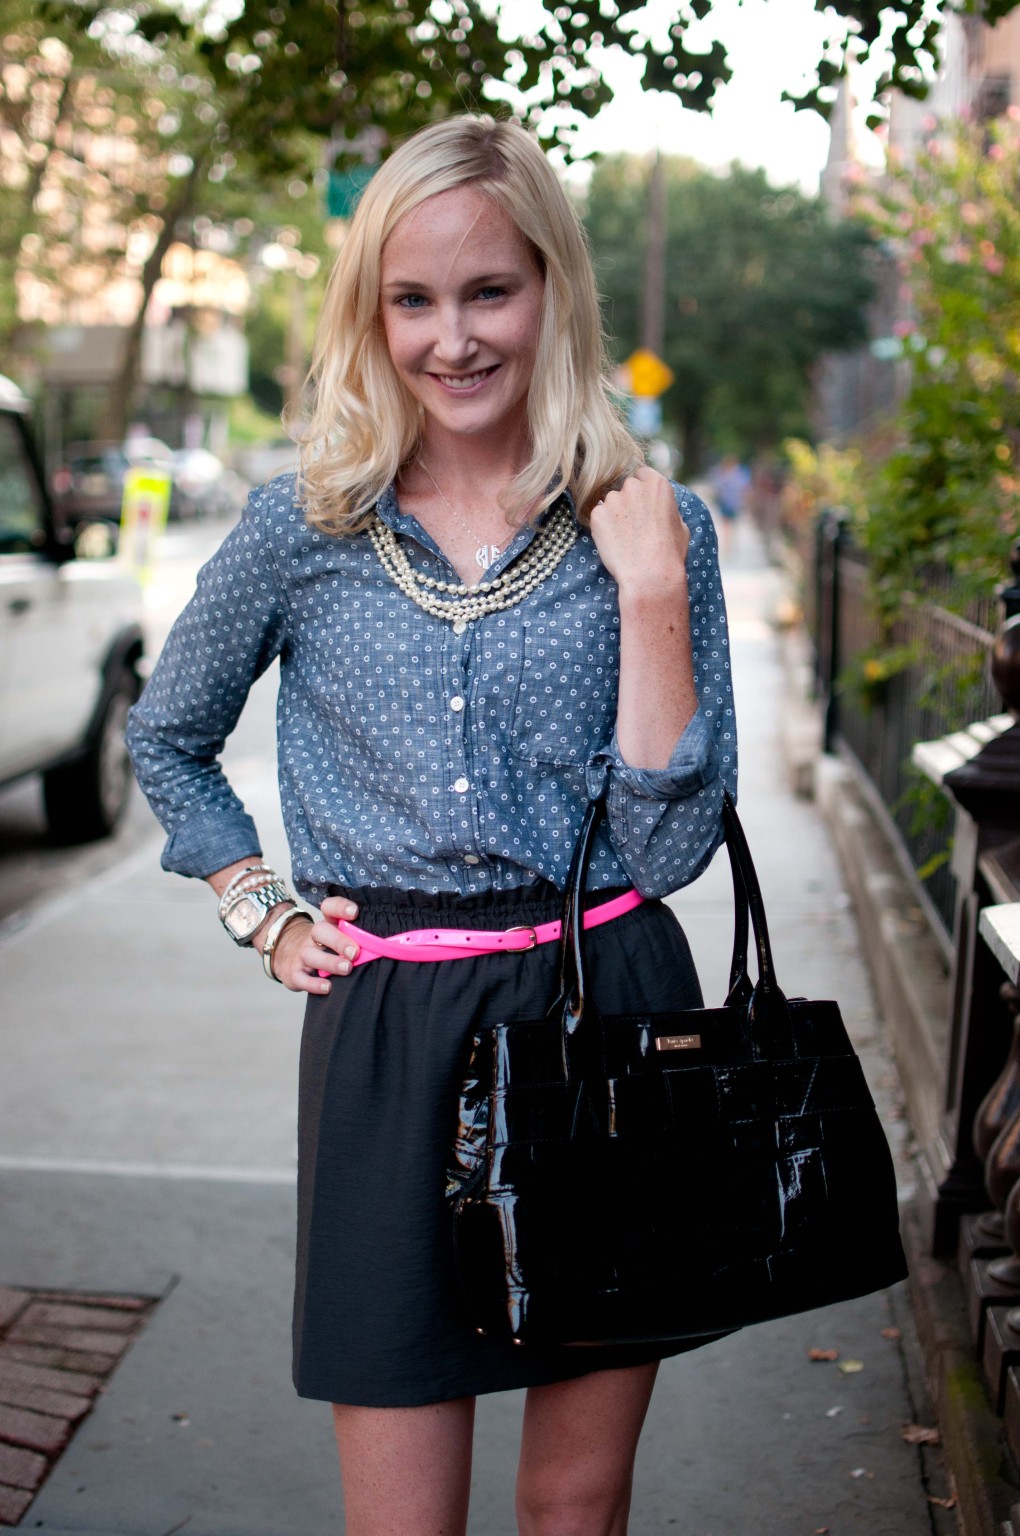 Nights on the Town: Chambray Skirts and Black Cinched Skirts